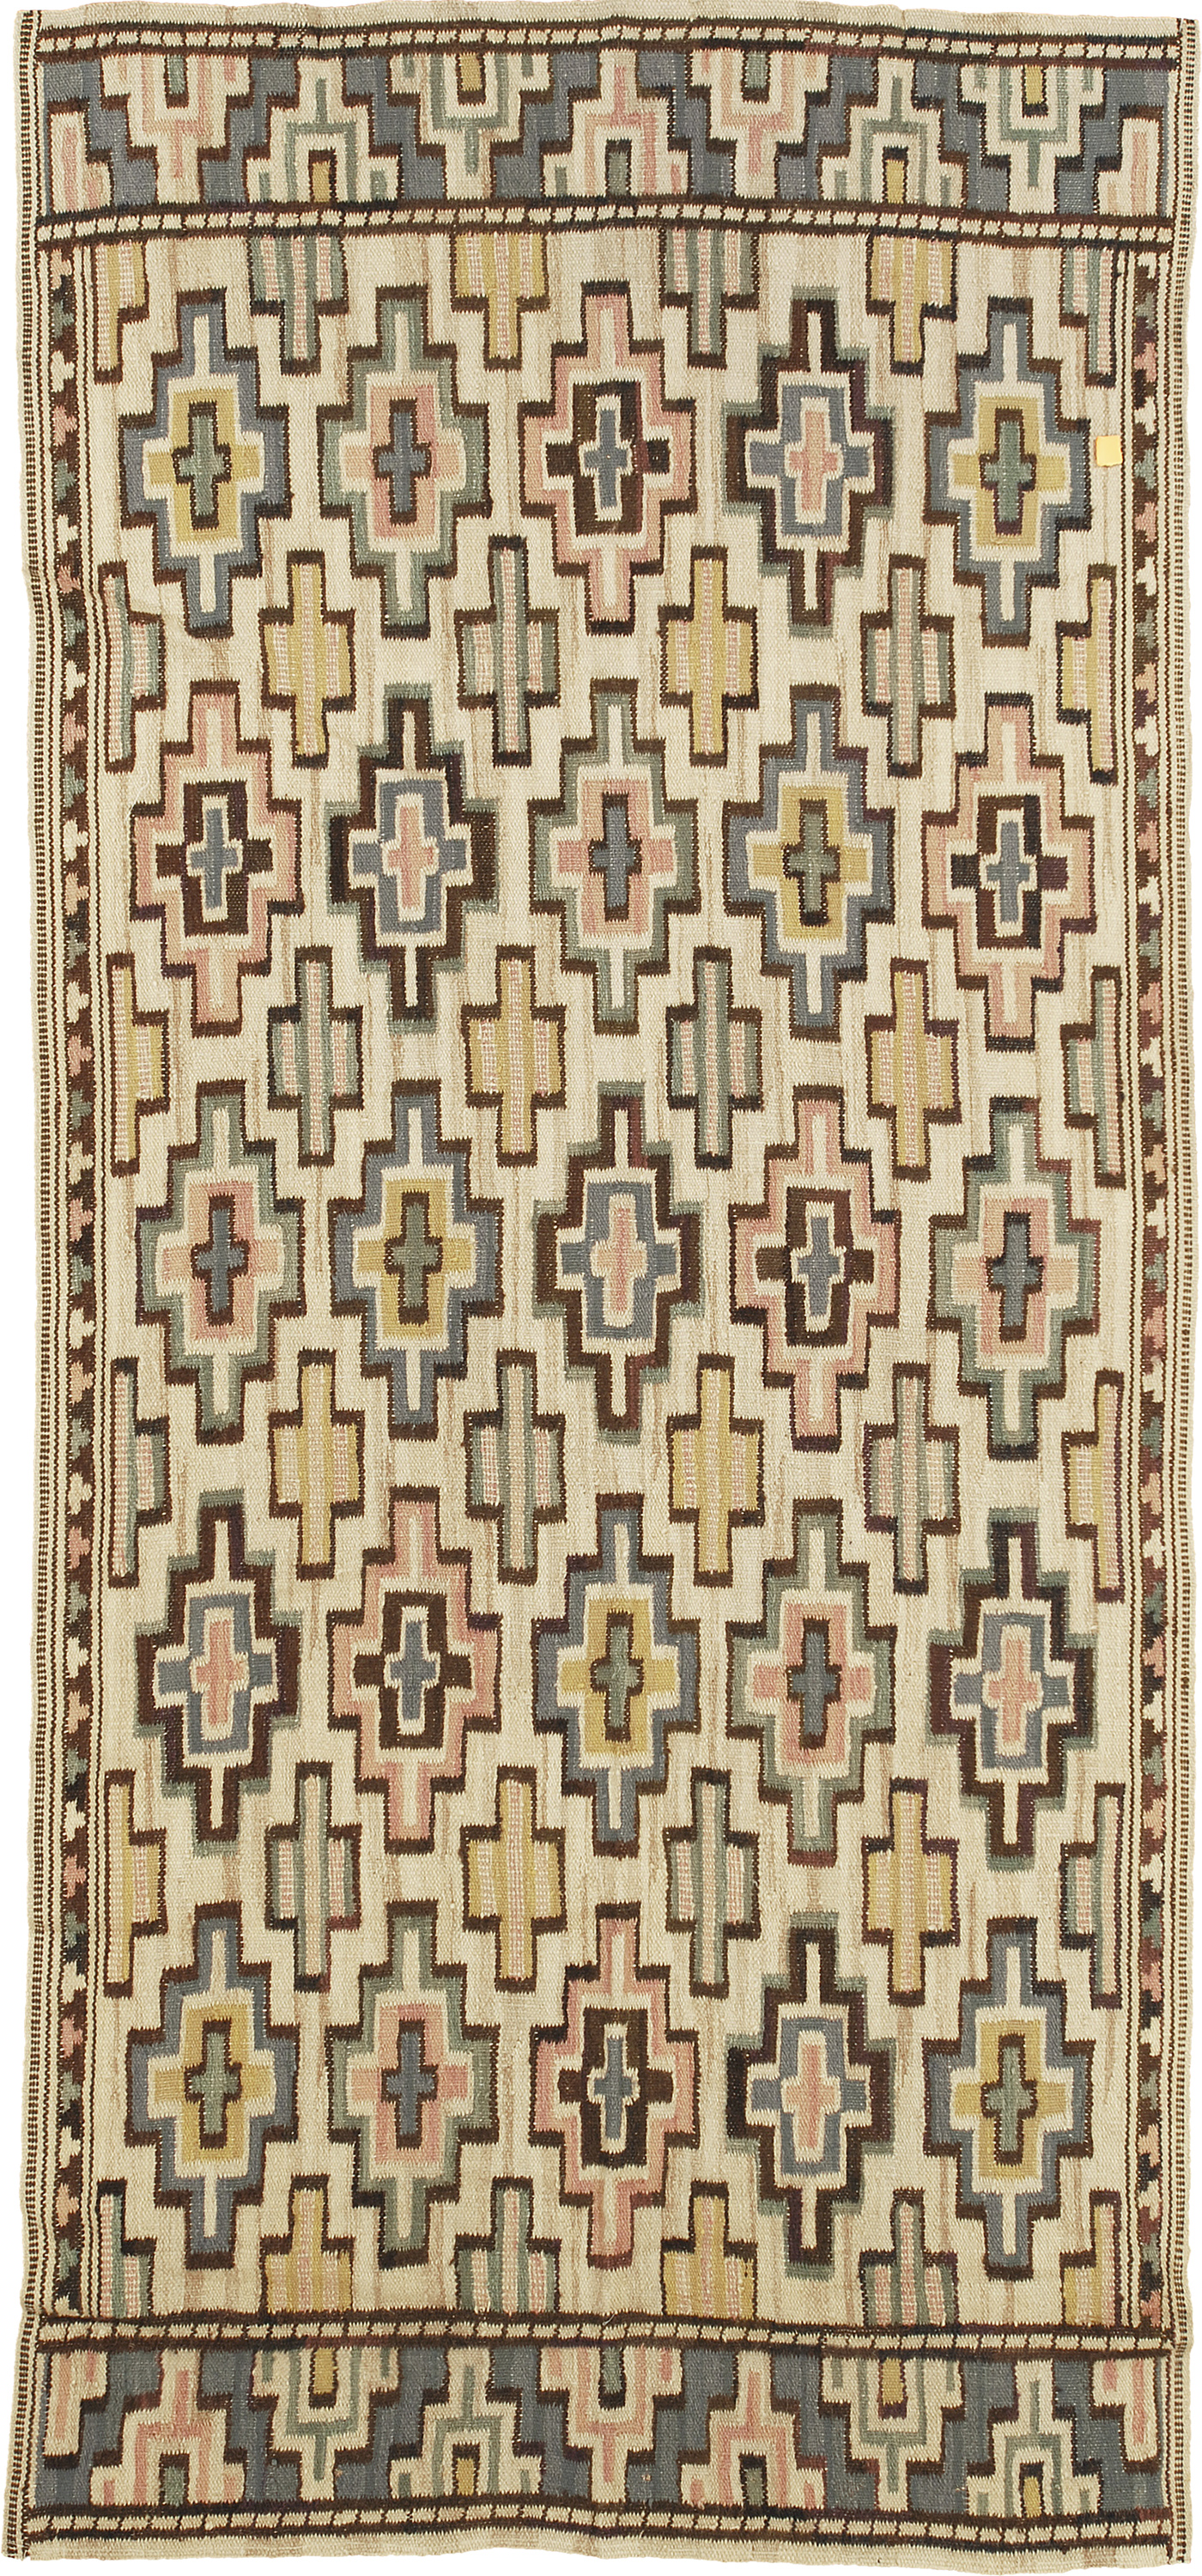 Swedish Vintage Wall Hanging by Marta Maas-Fjetterström | FJ Hakimian | Carpet Gallery in NYC